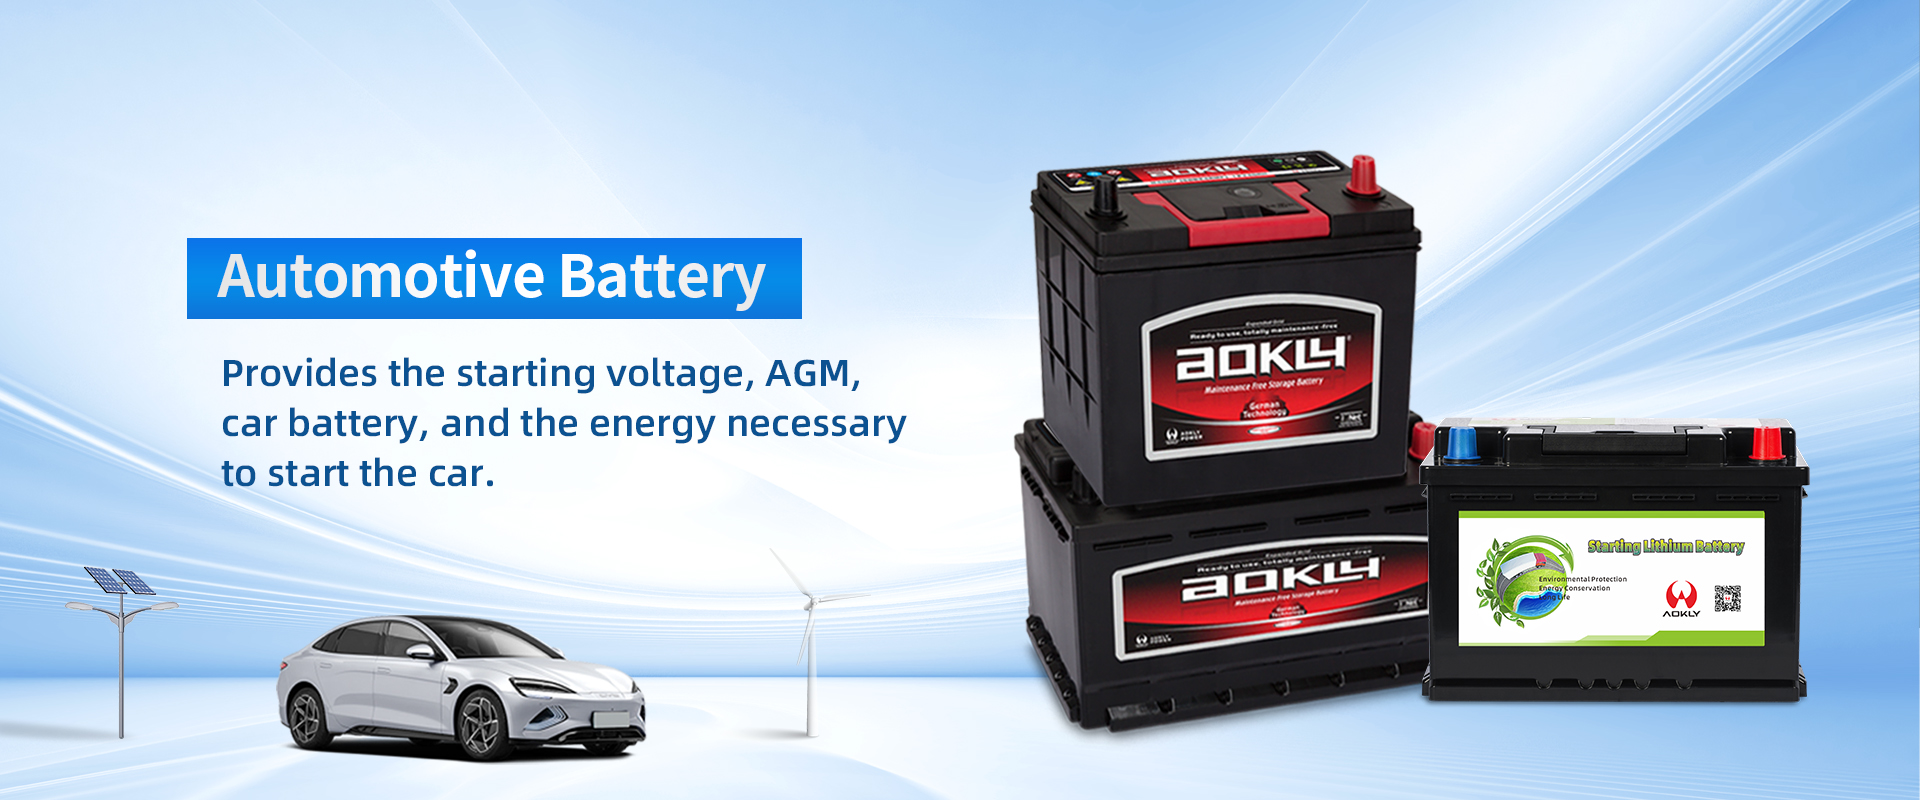 Portable Lithium System  Battery Manufacturing Companies - Aokly